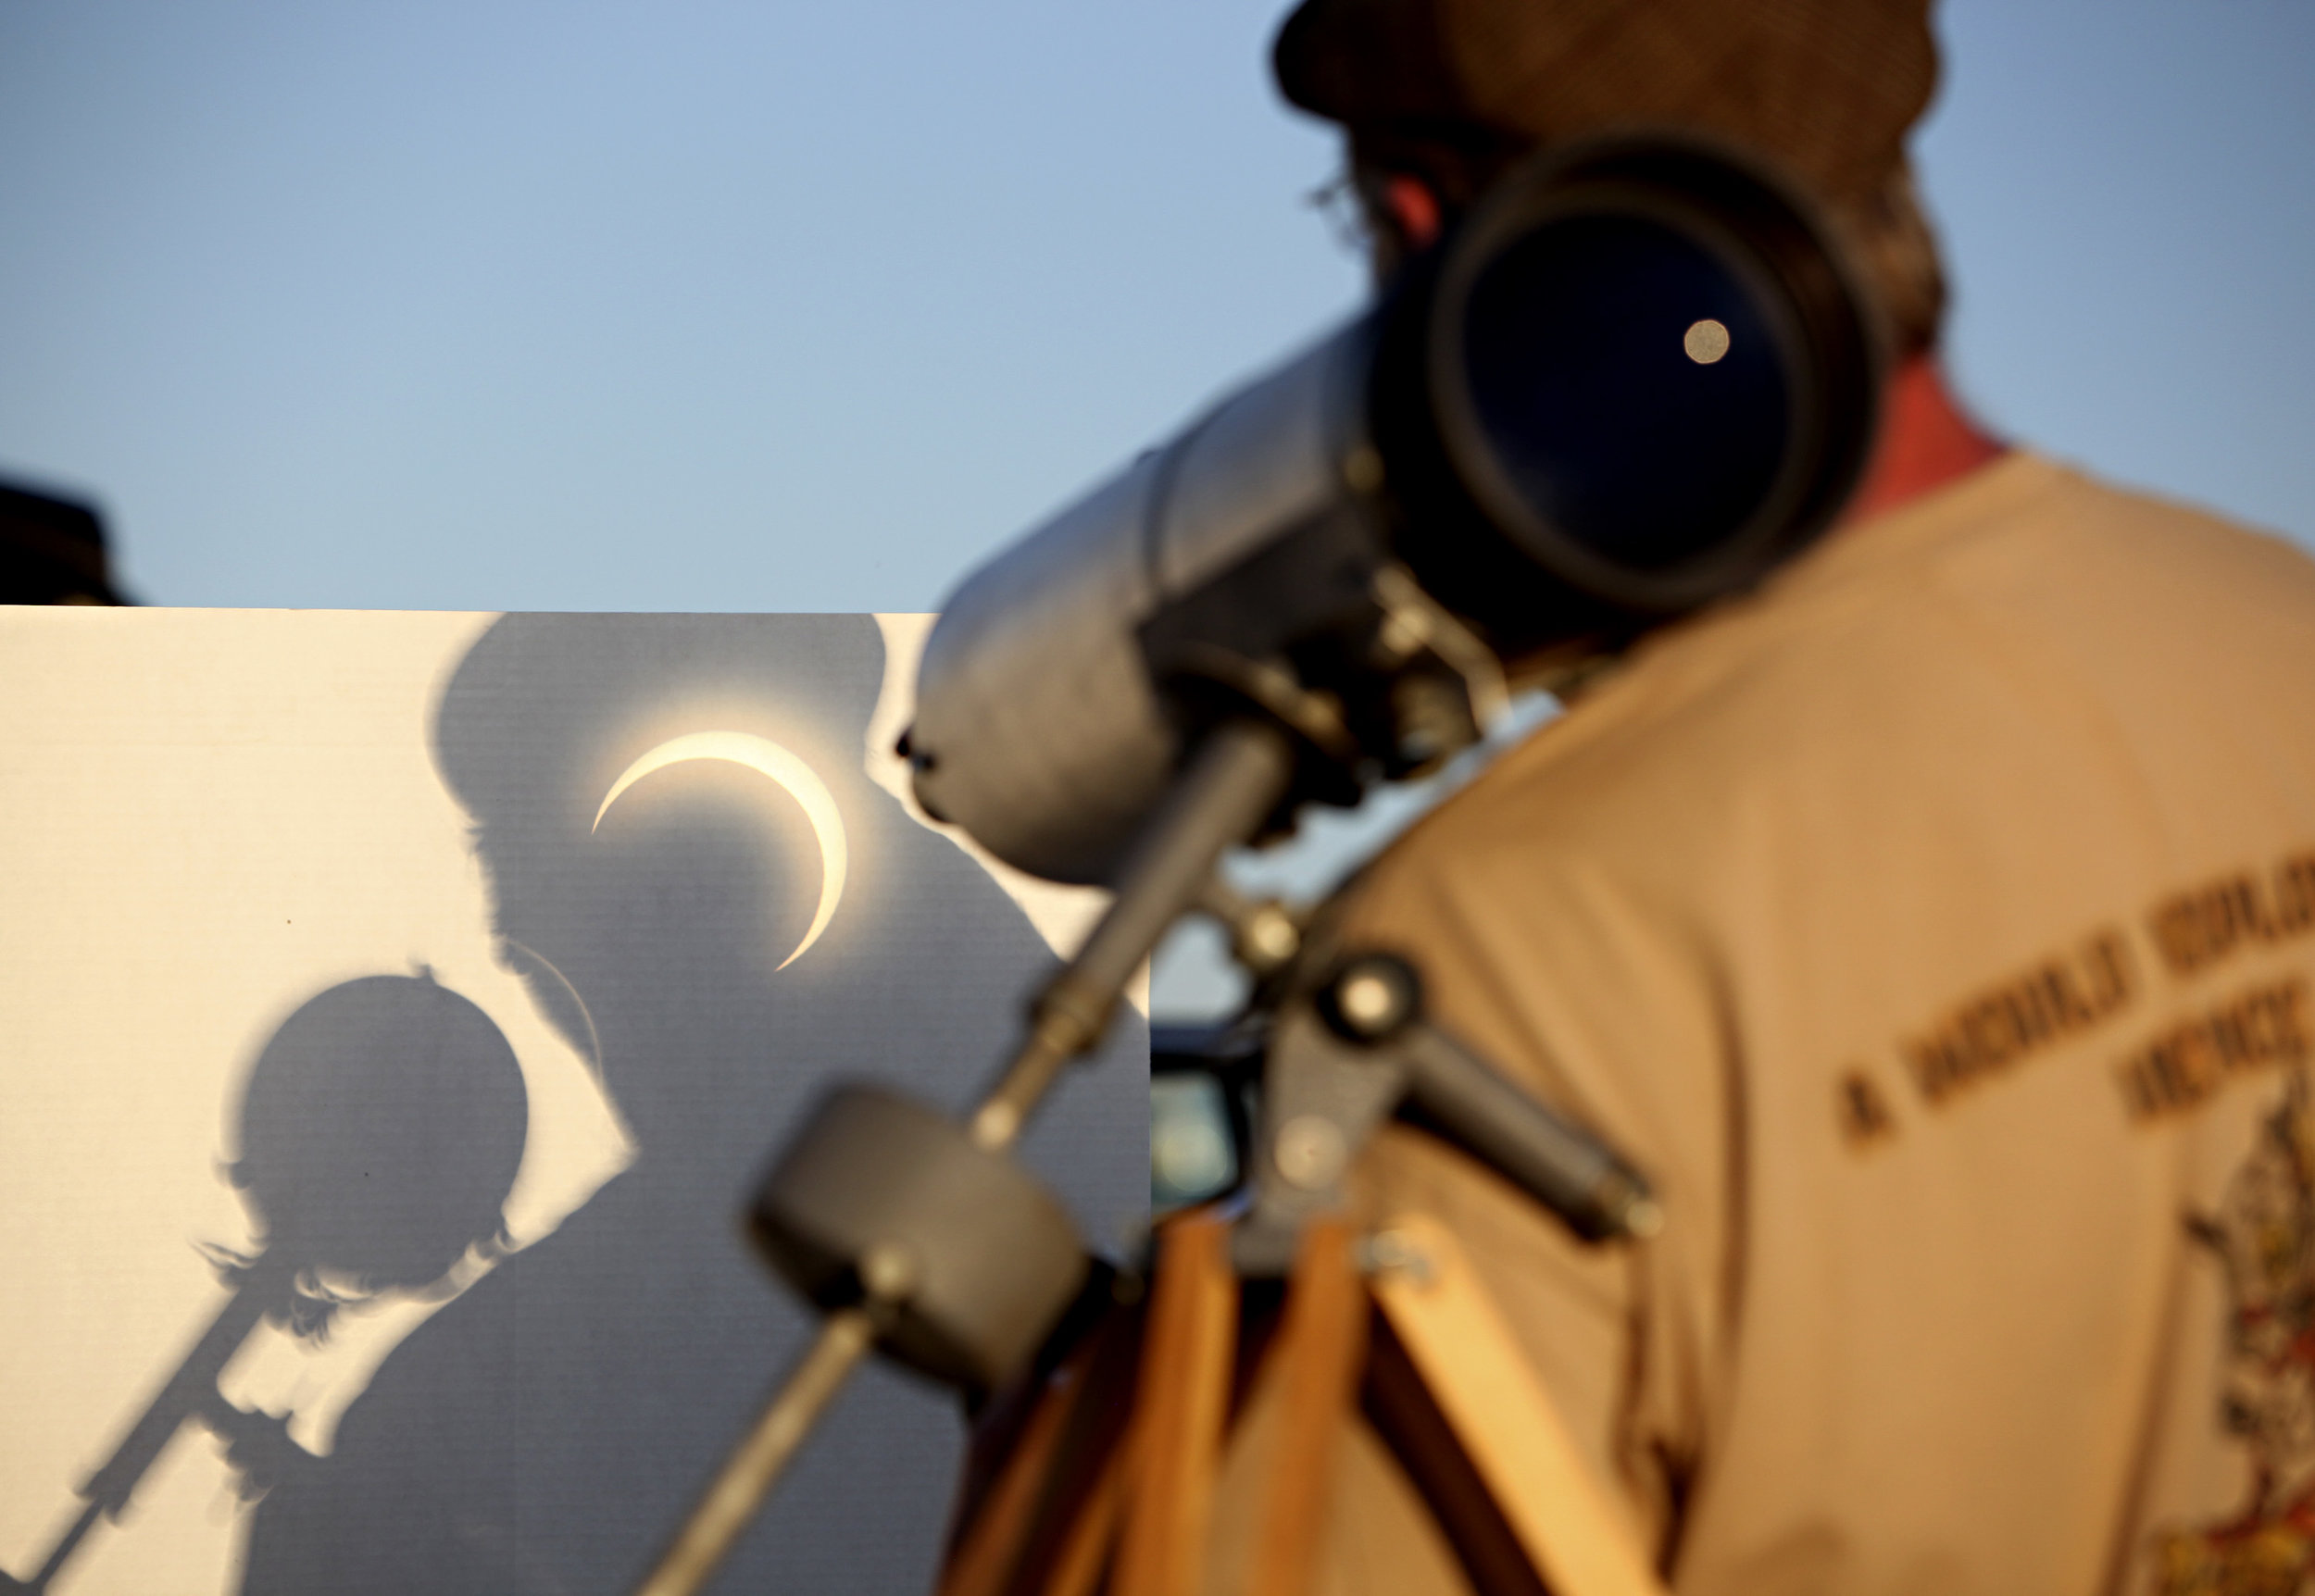  Dave Gallaher, from the University of Colorado in Boulder, CO, watches the annular solar eclipse projected into his shadow during the viewing party near the Hard Rock Casino Presents the Pavilion, Sunday, May 20, 2012, in Albuquerque, NM. (Morgan Pe